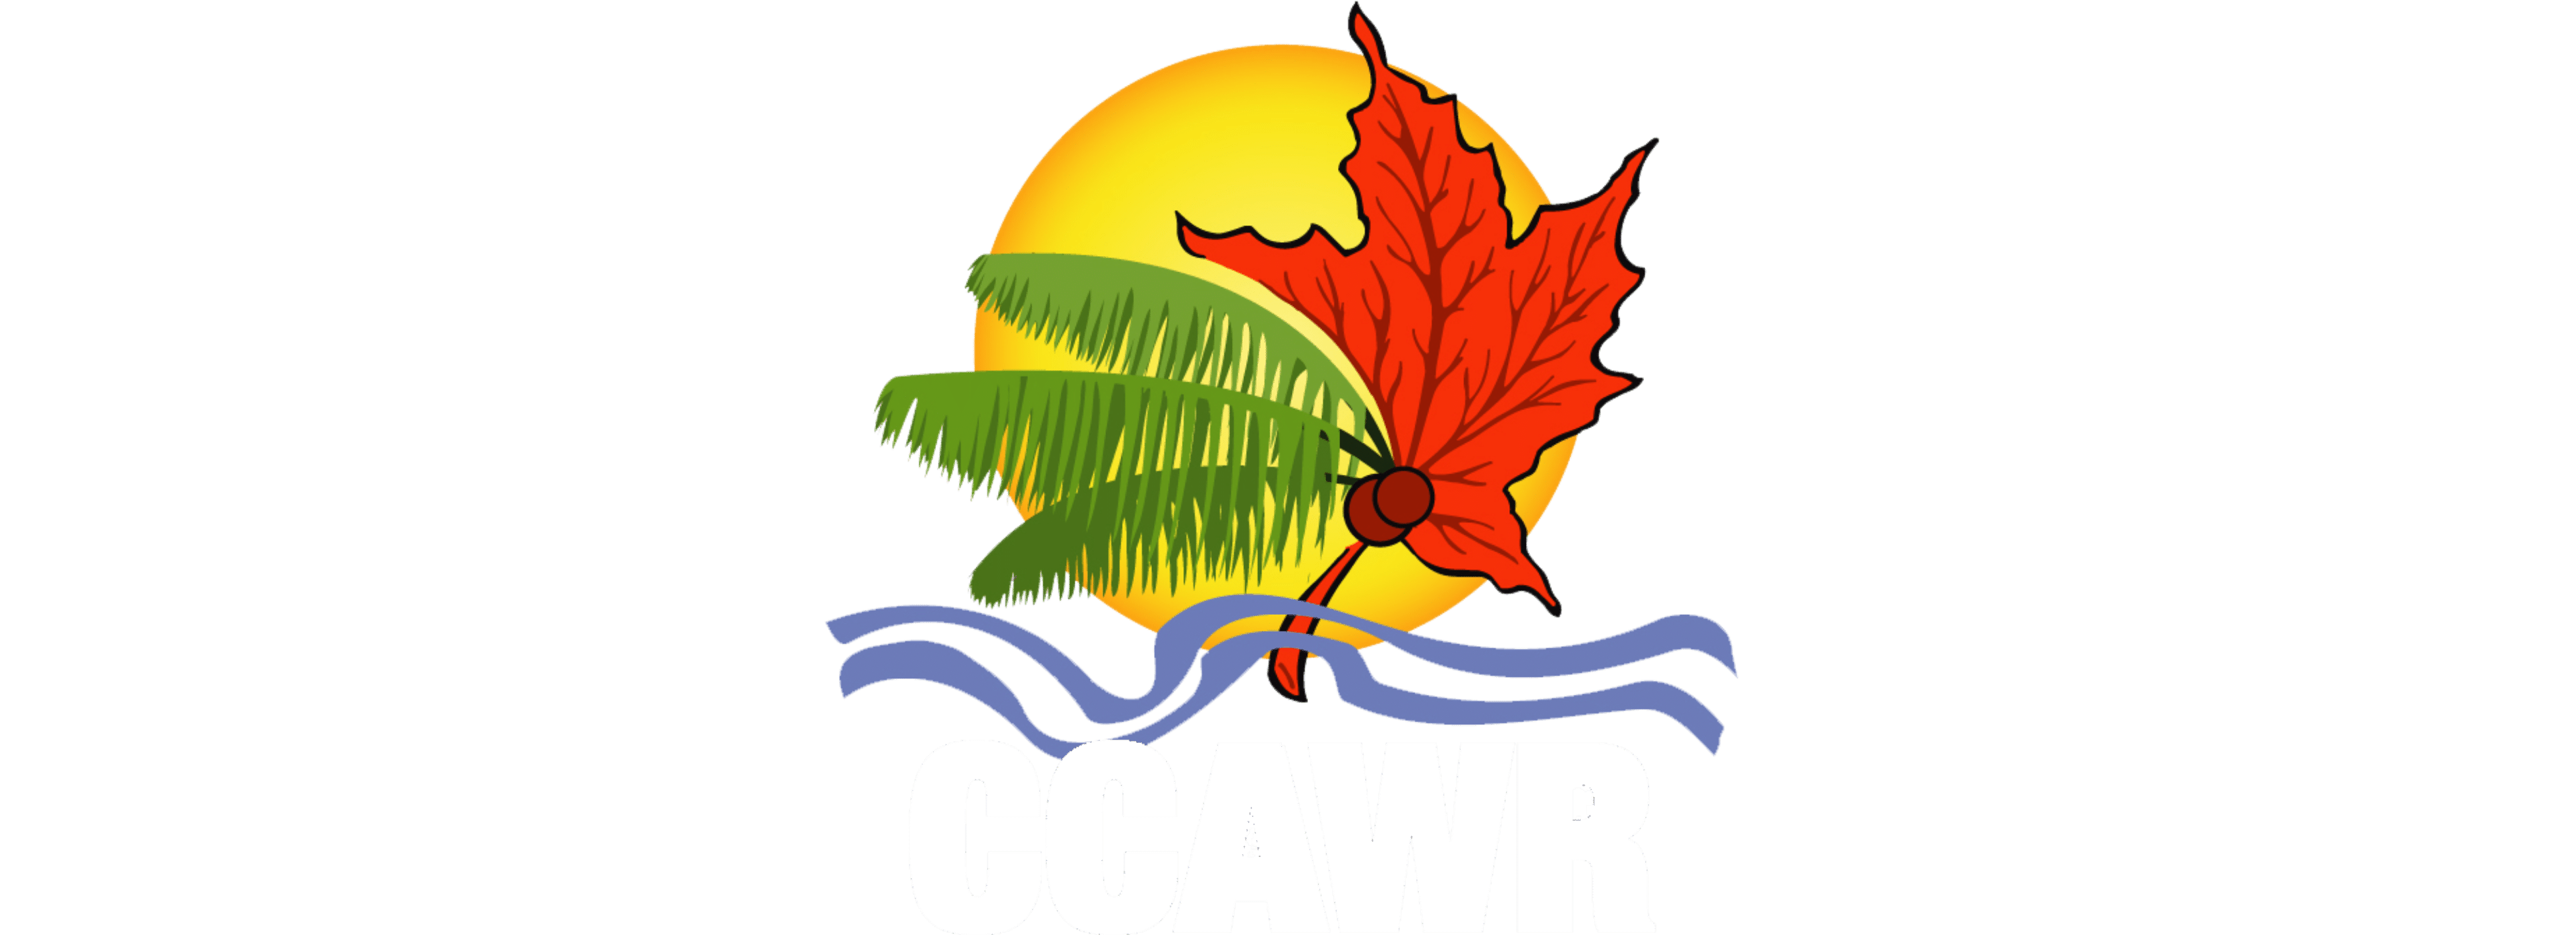 Graphic logo featuring a sun, palm leaf, red maple leaf, and waves with the acronym "ccawr" below. Toronto Caribana Carnival: Ultimate Guide to Caribana Festival Events